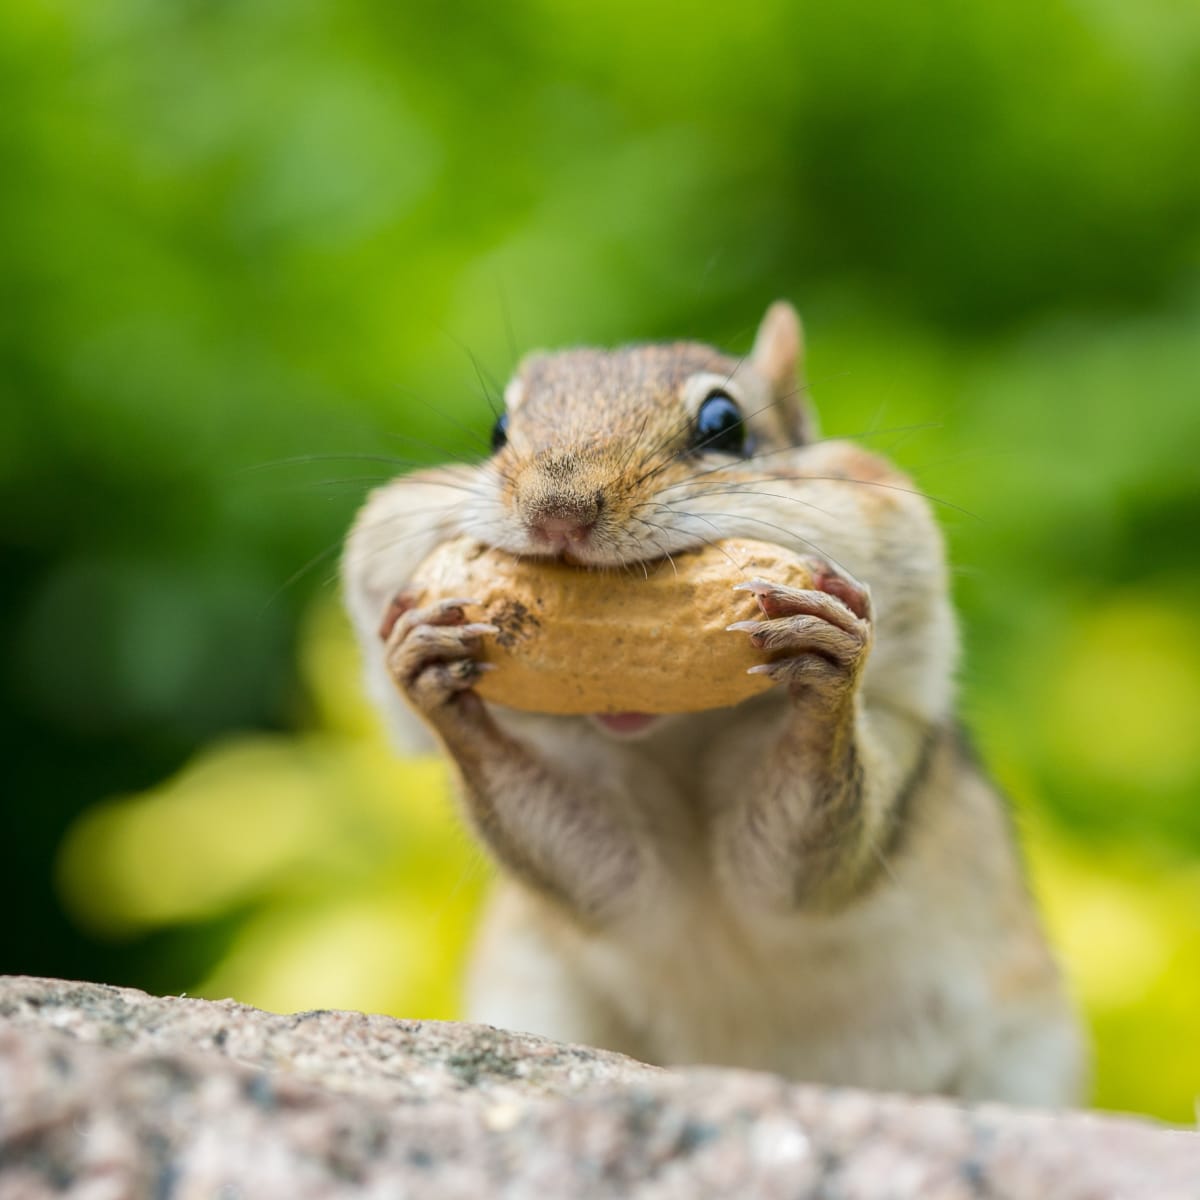 A chipmunk enjoying a snack at his tiny picnic table is just adorable ➤ Buzzday.info